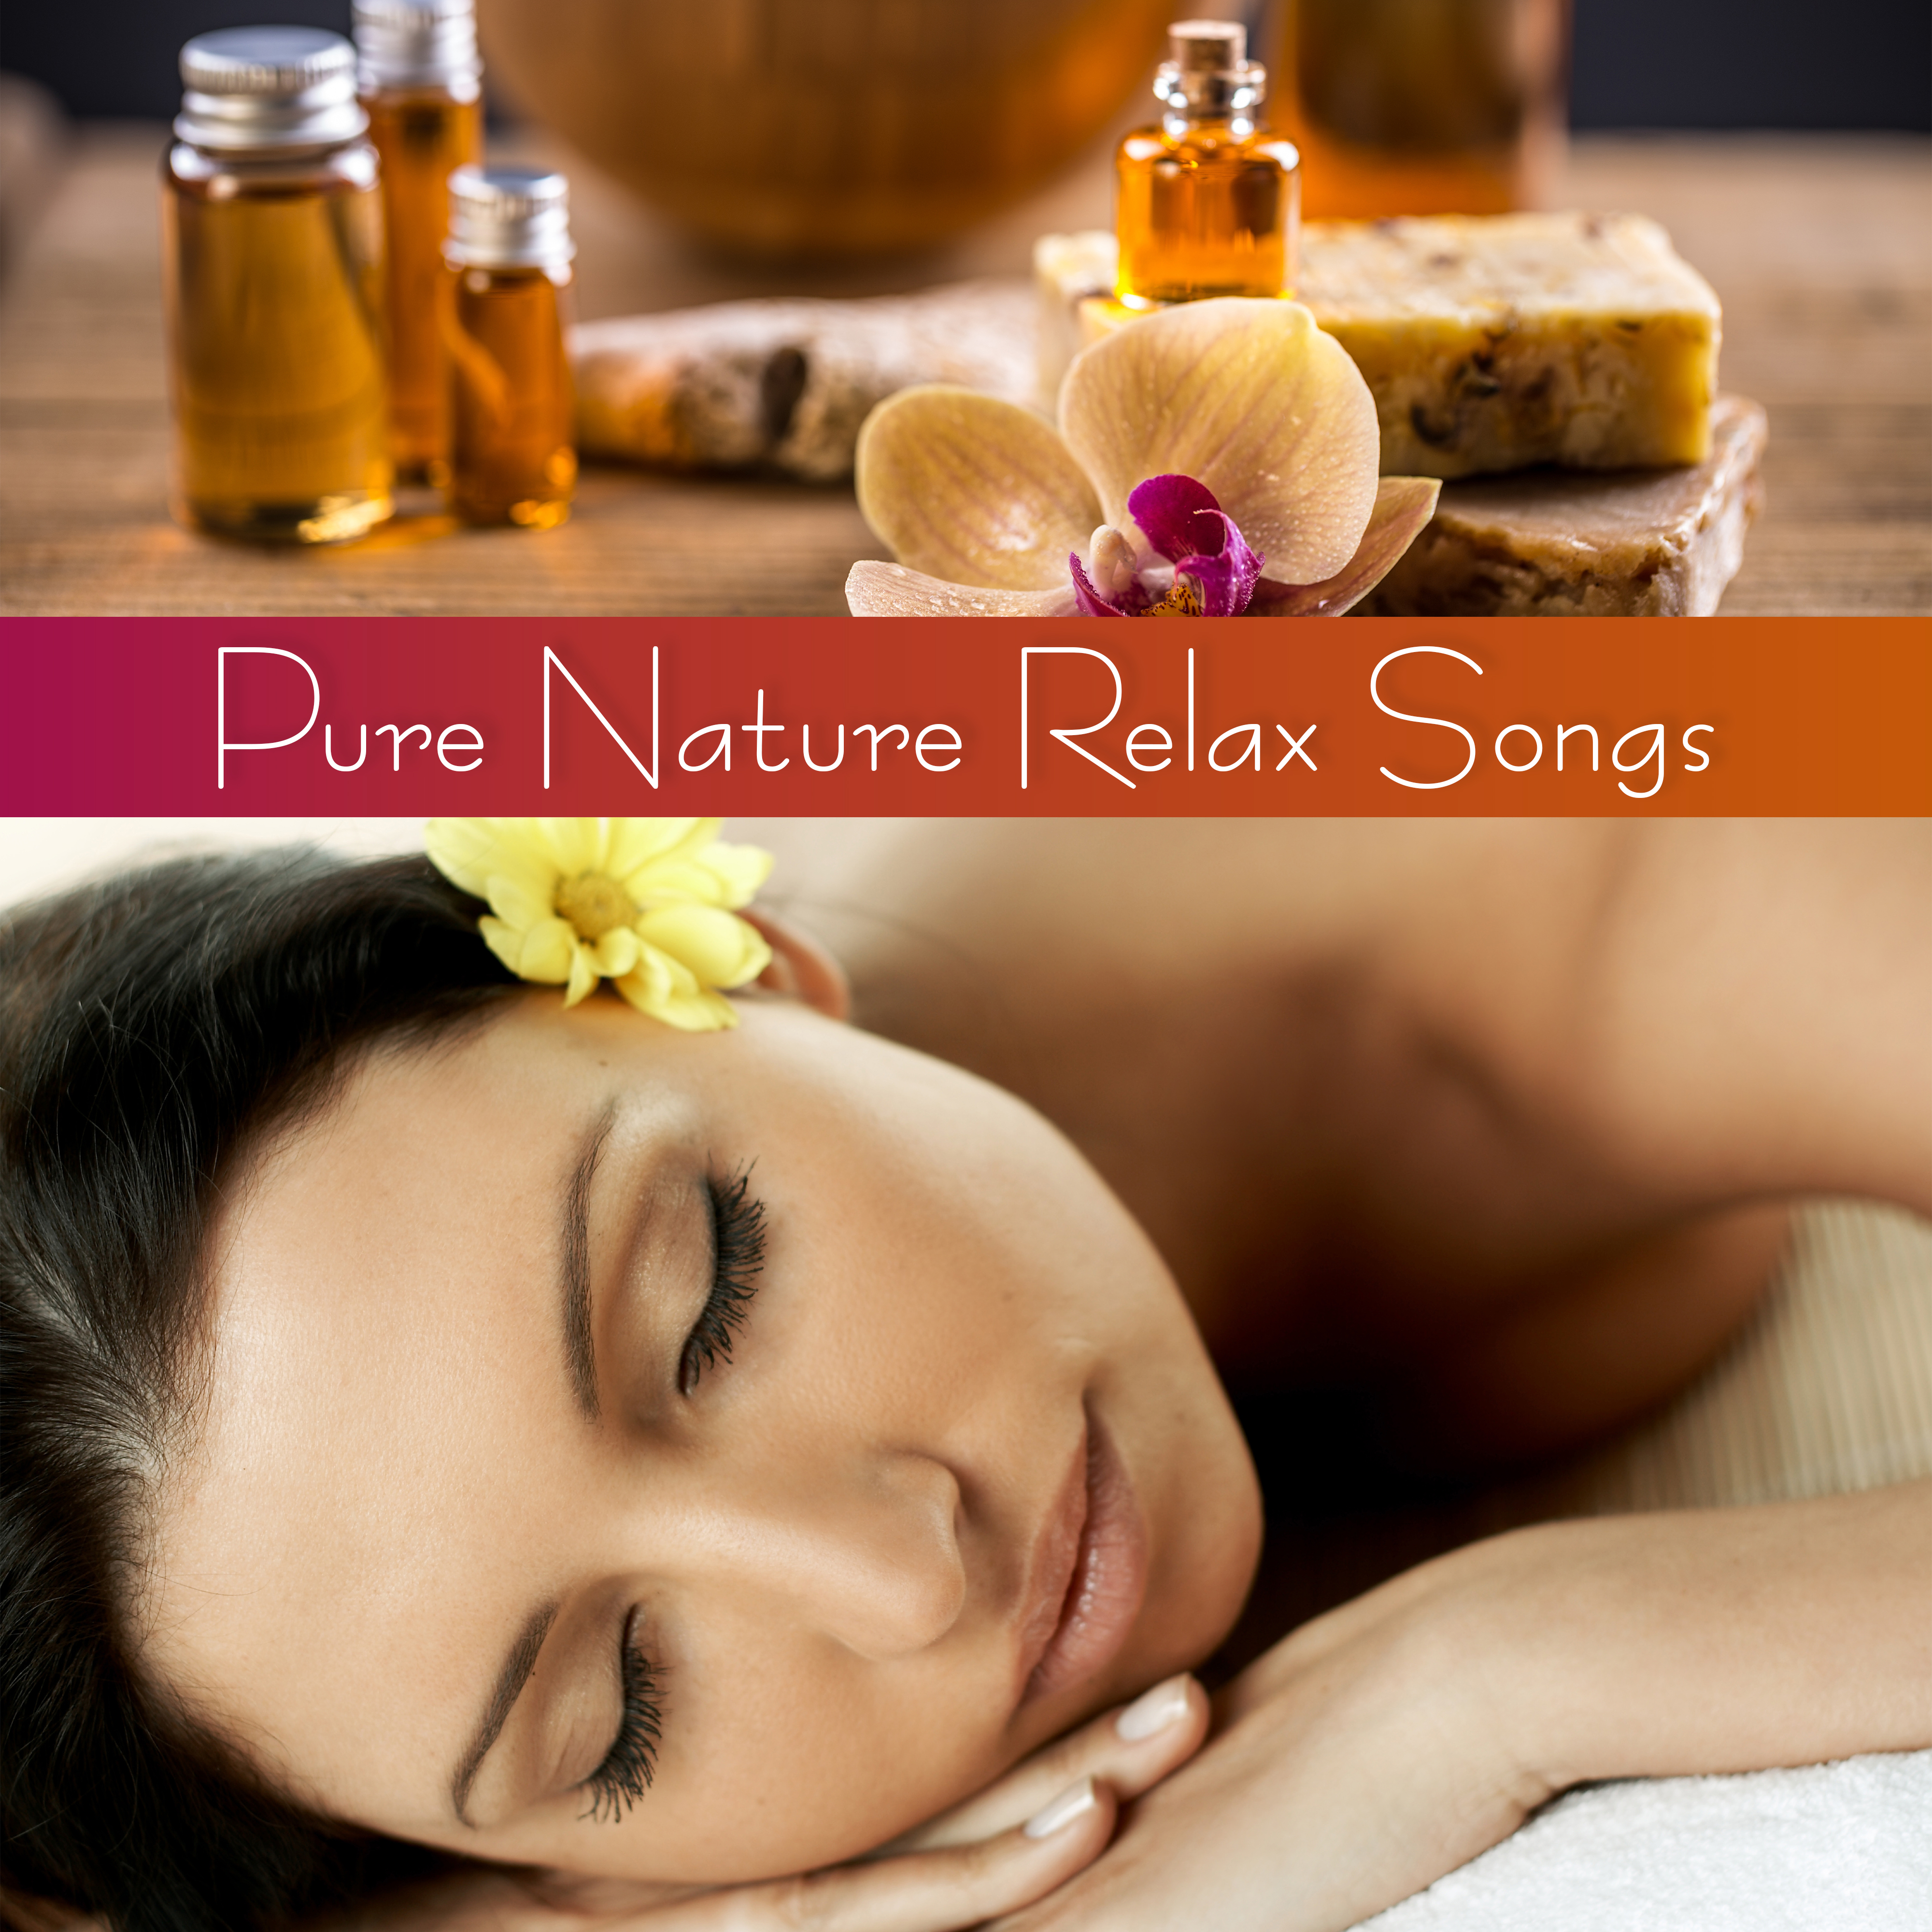 Pure Nature Relax Songs  Spa  Wellness Perfect New Age Music Compilation, Massage Therapy Sounds, Soothing Spa